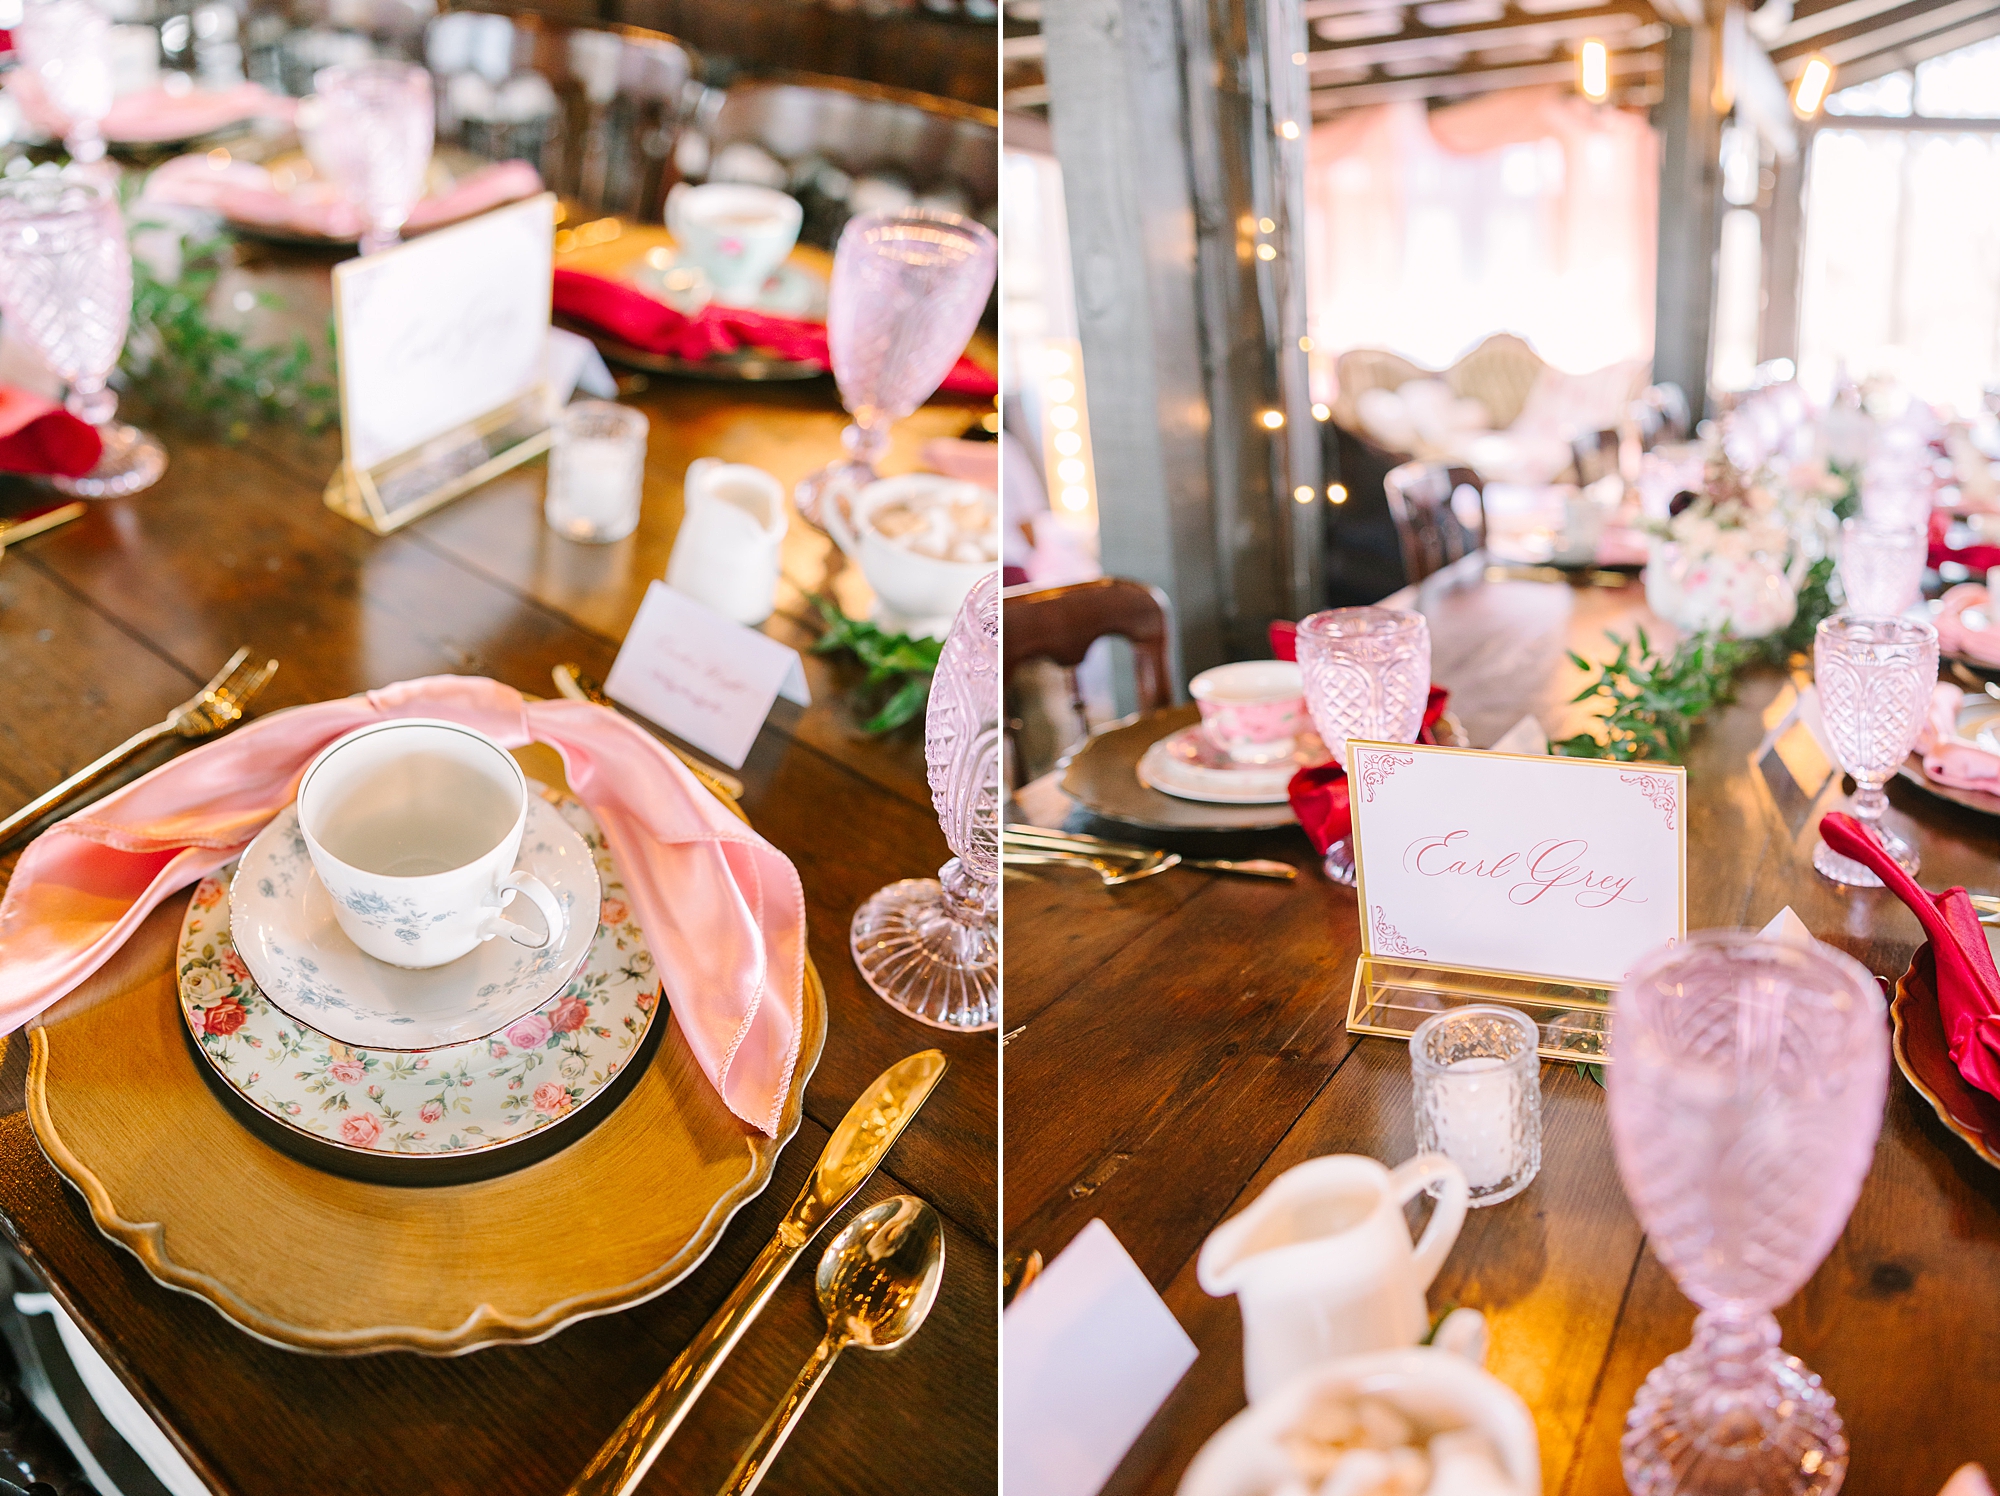 tea cups sit on gold chargers with pink napkins